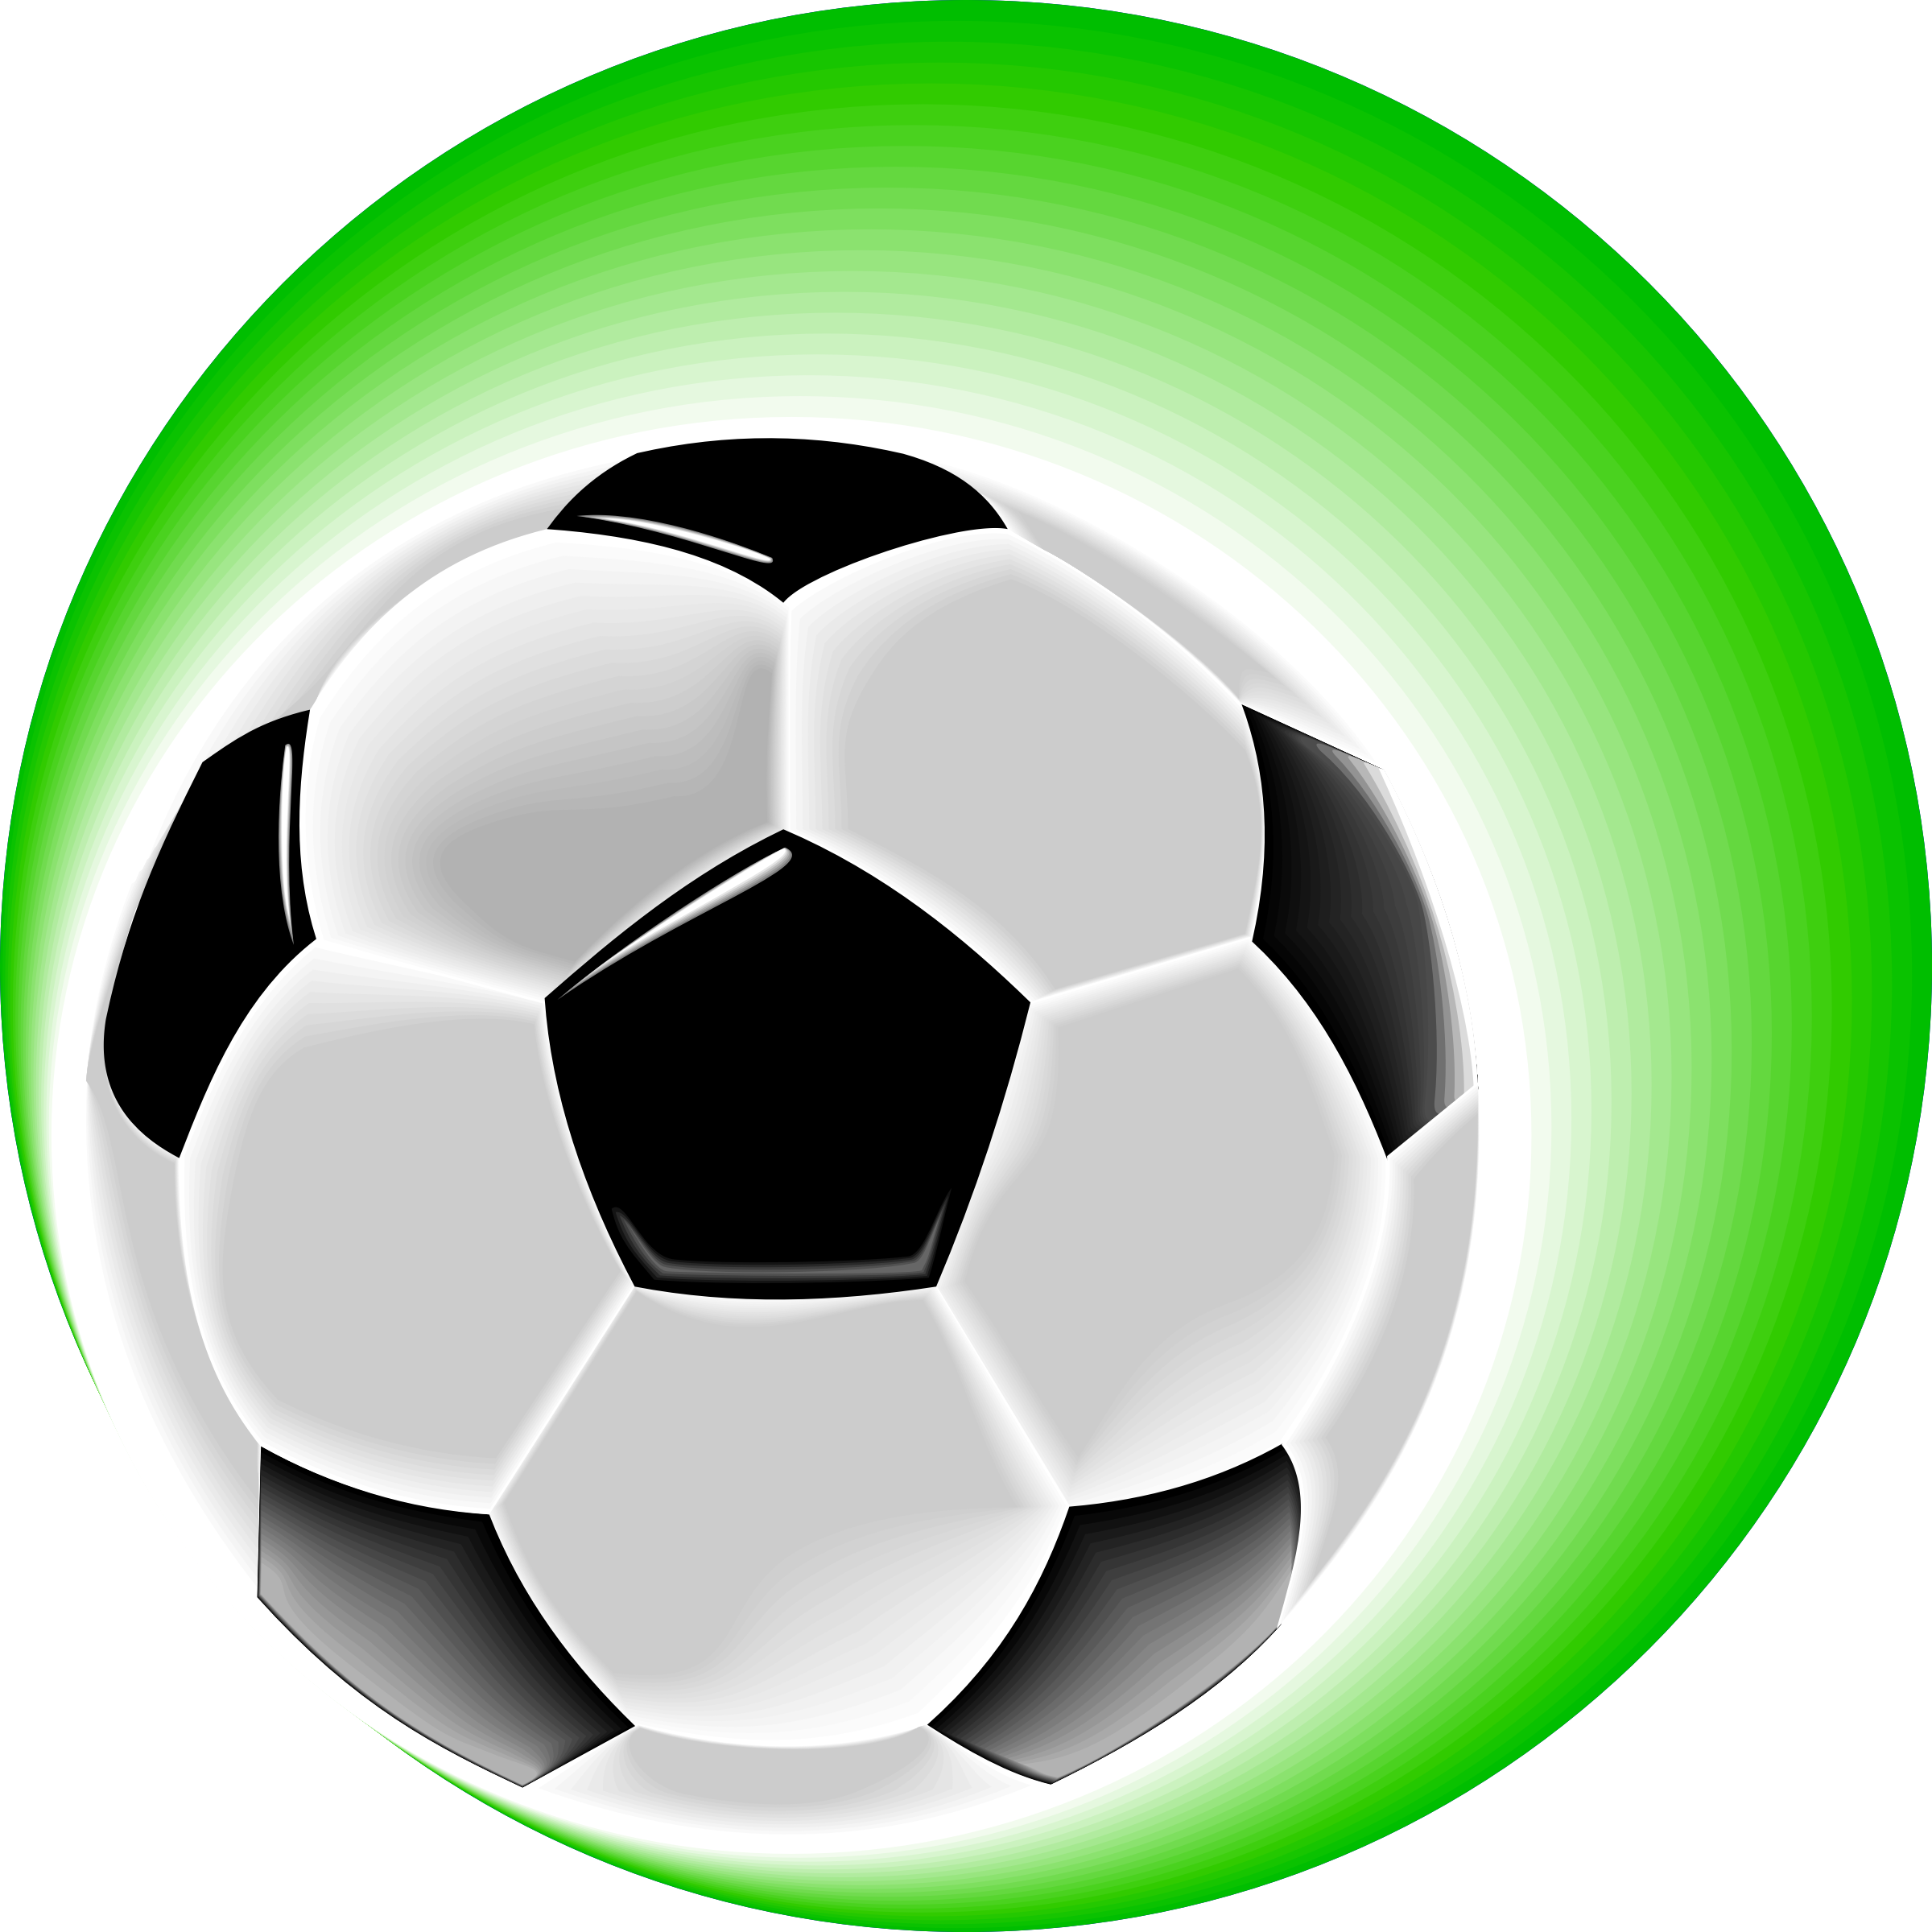 Football player Free Clip art - Soccer Ball Pic png download - 799*800 ...